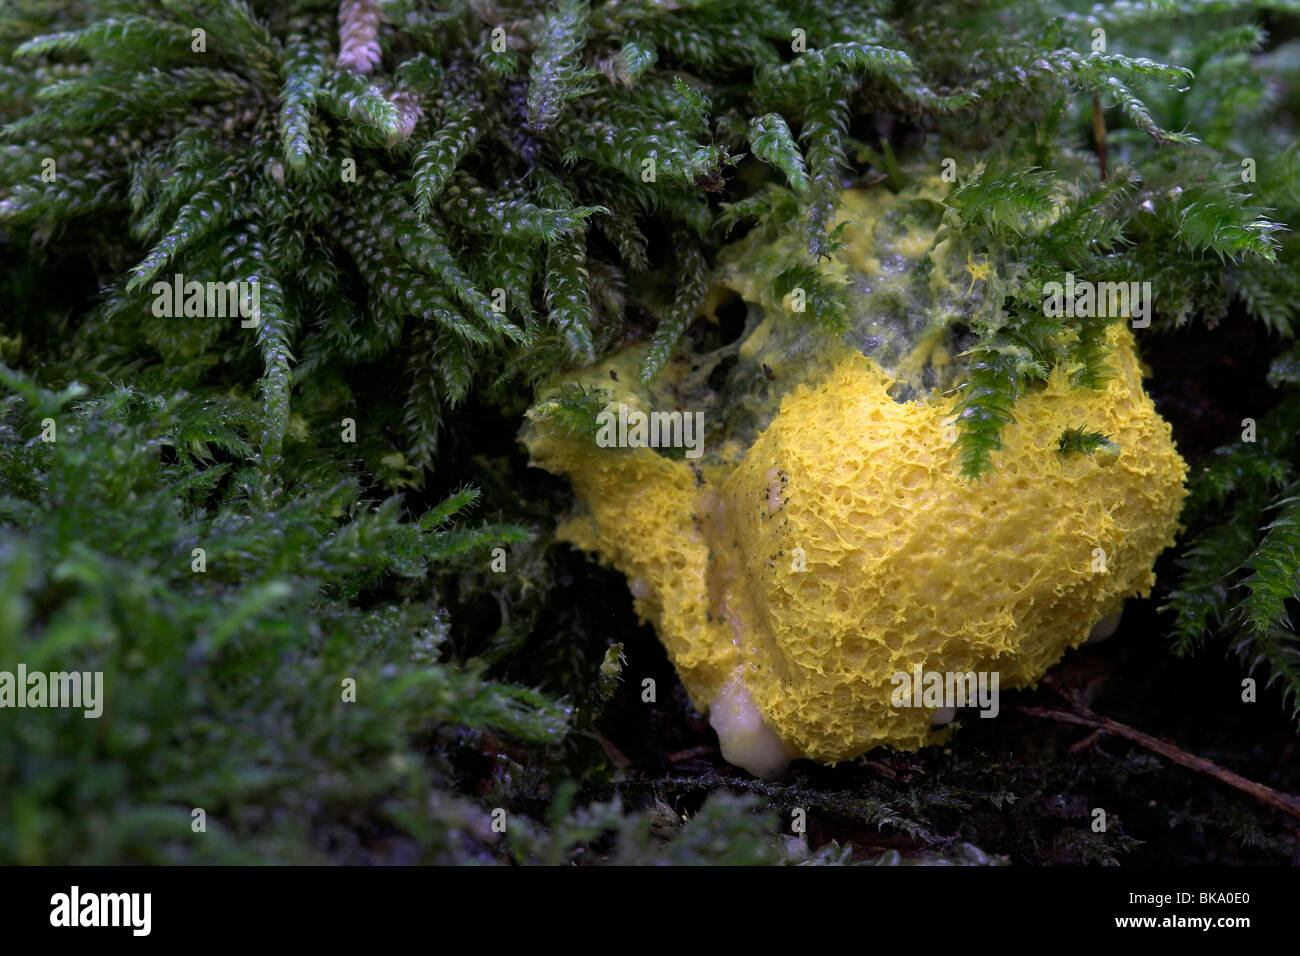 Yellow  Dog's Vomit Slime Mold between green moss Stock Photo